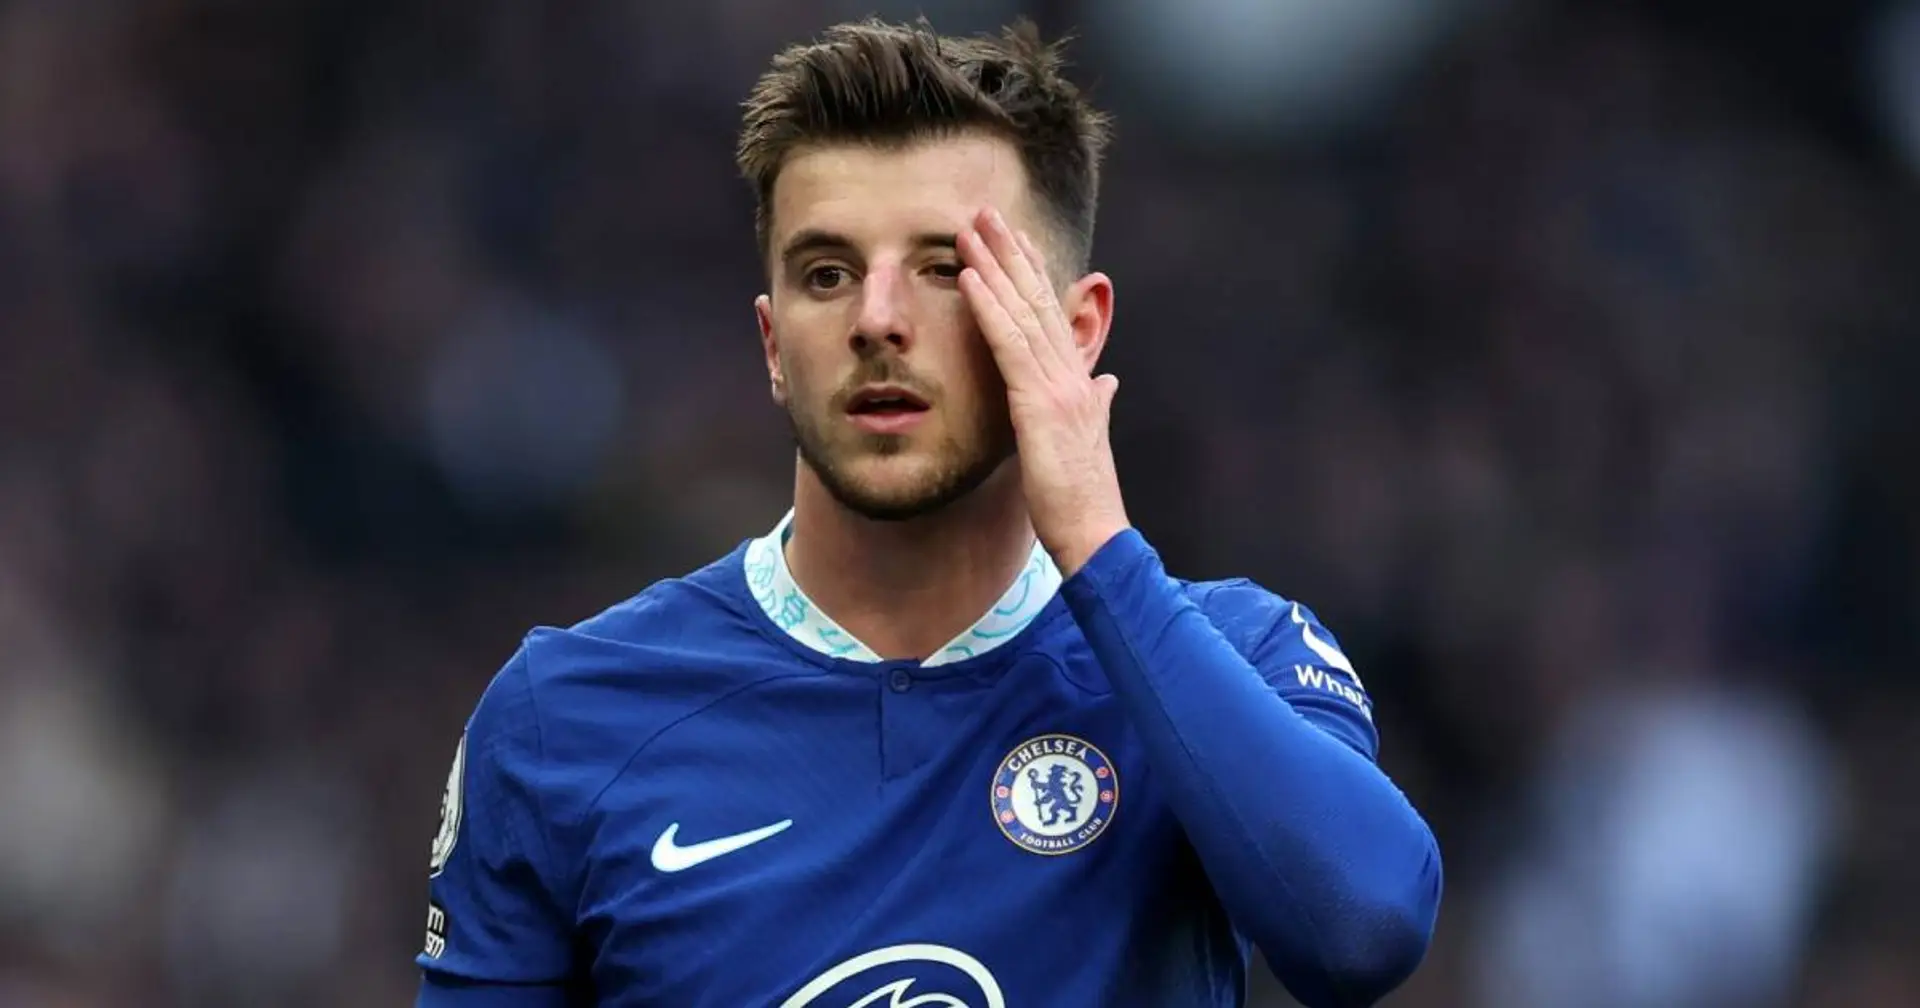 Mount unlikely to sign Chelsea deal amid Arsenal links & 2 more under-radar stories